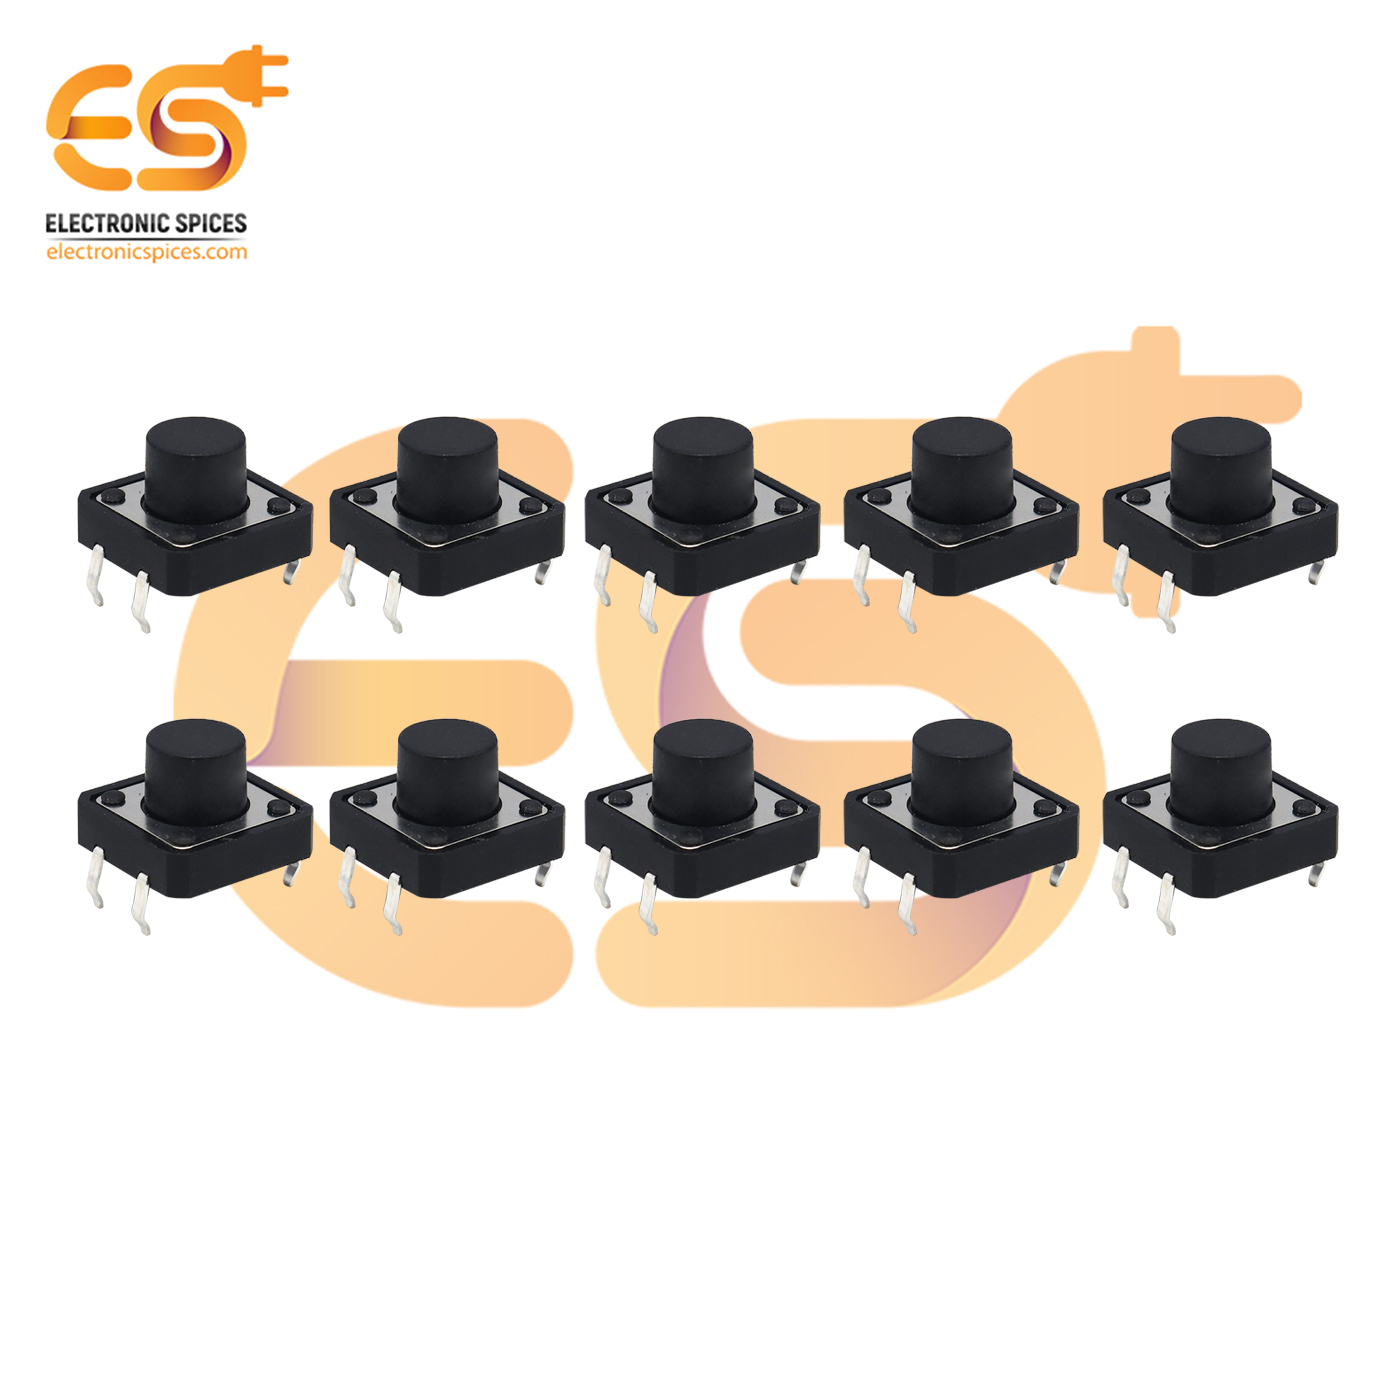 12 x 12 x 7mm Black color tactile momentary push button switch